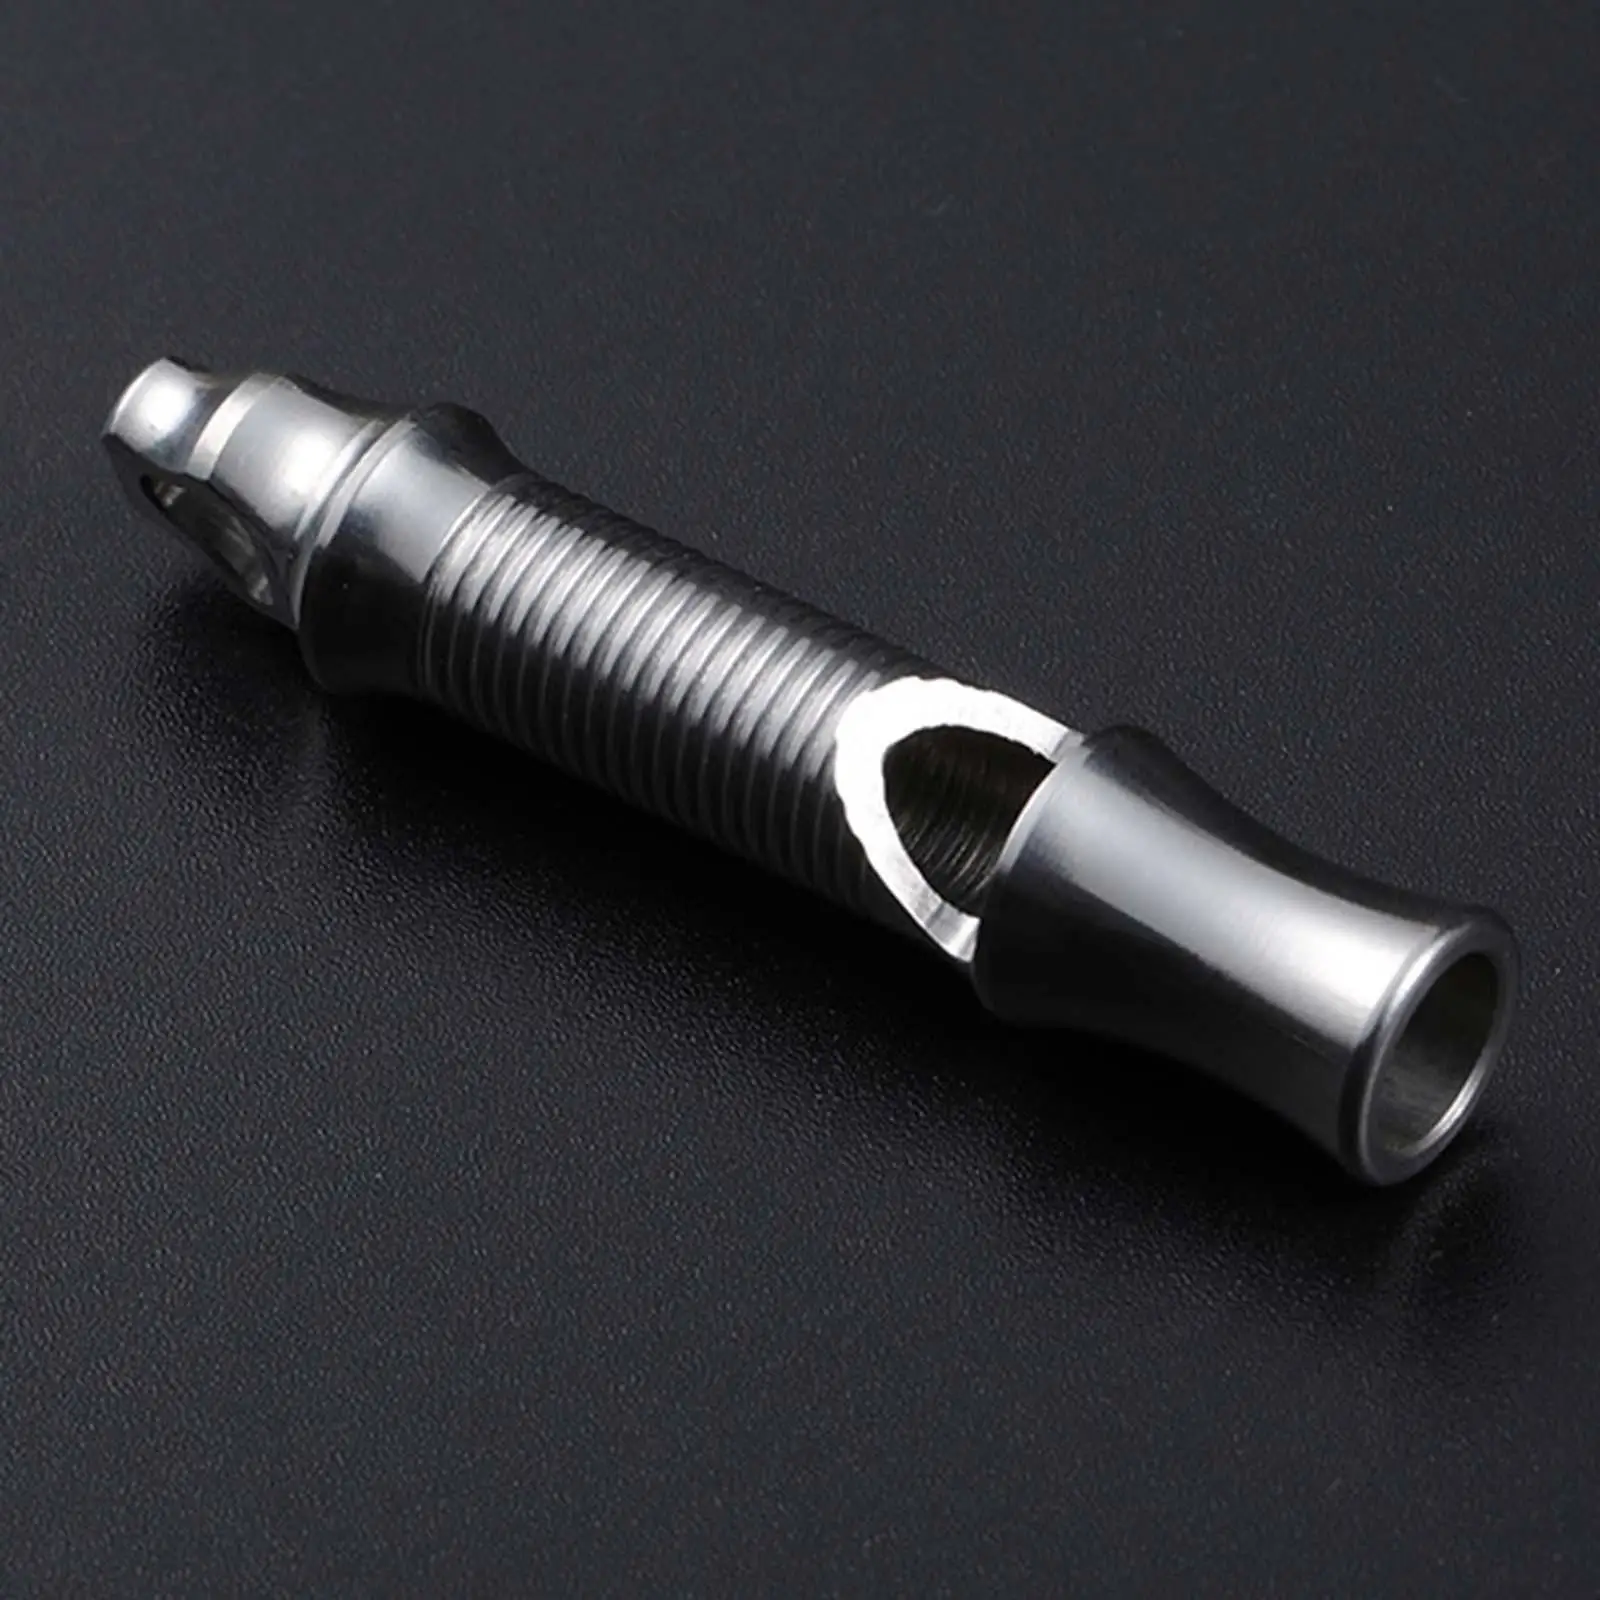 Emergency Whistle Stainless Steel High Decibel Survival Whistle for Hiking